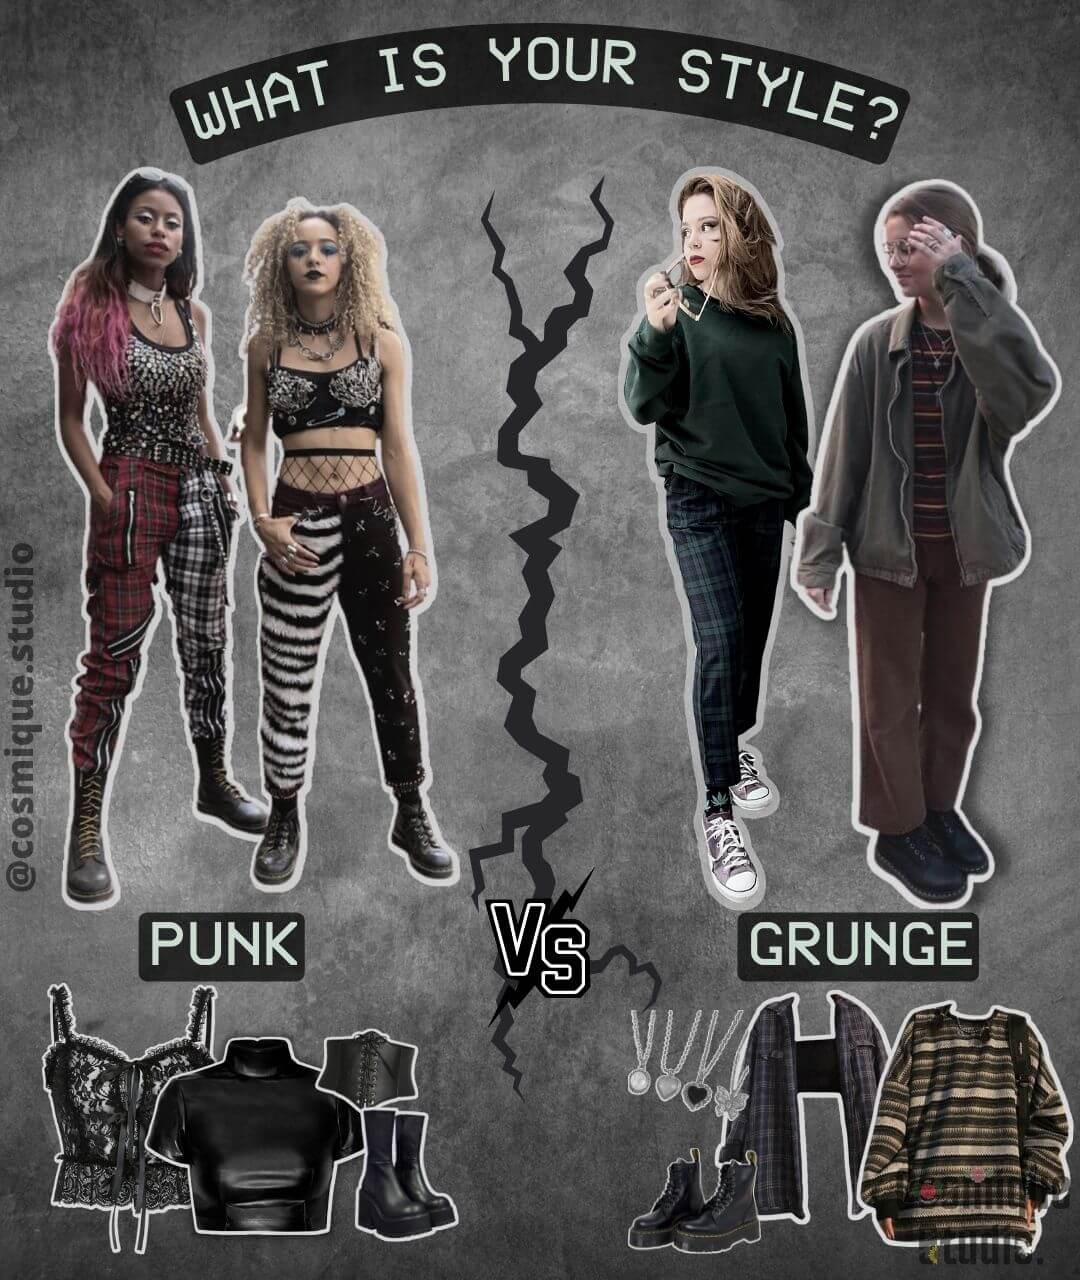 comparison between girls representing punk and grunge fashion styles 